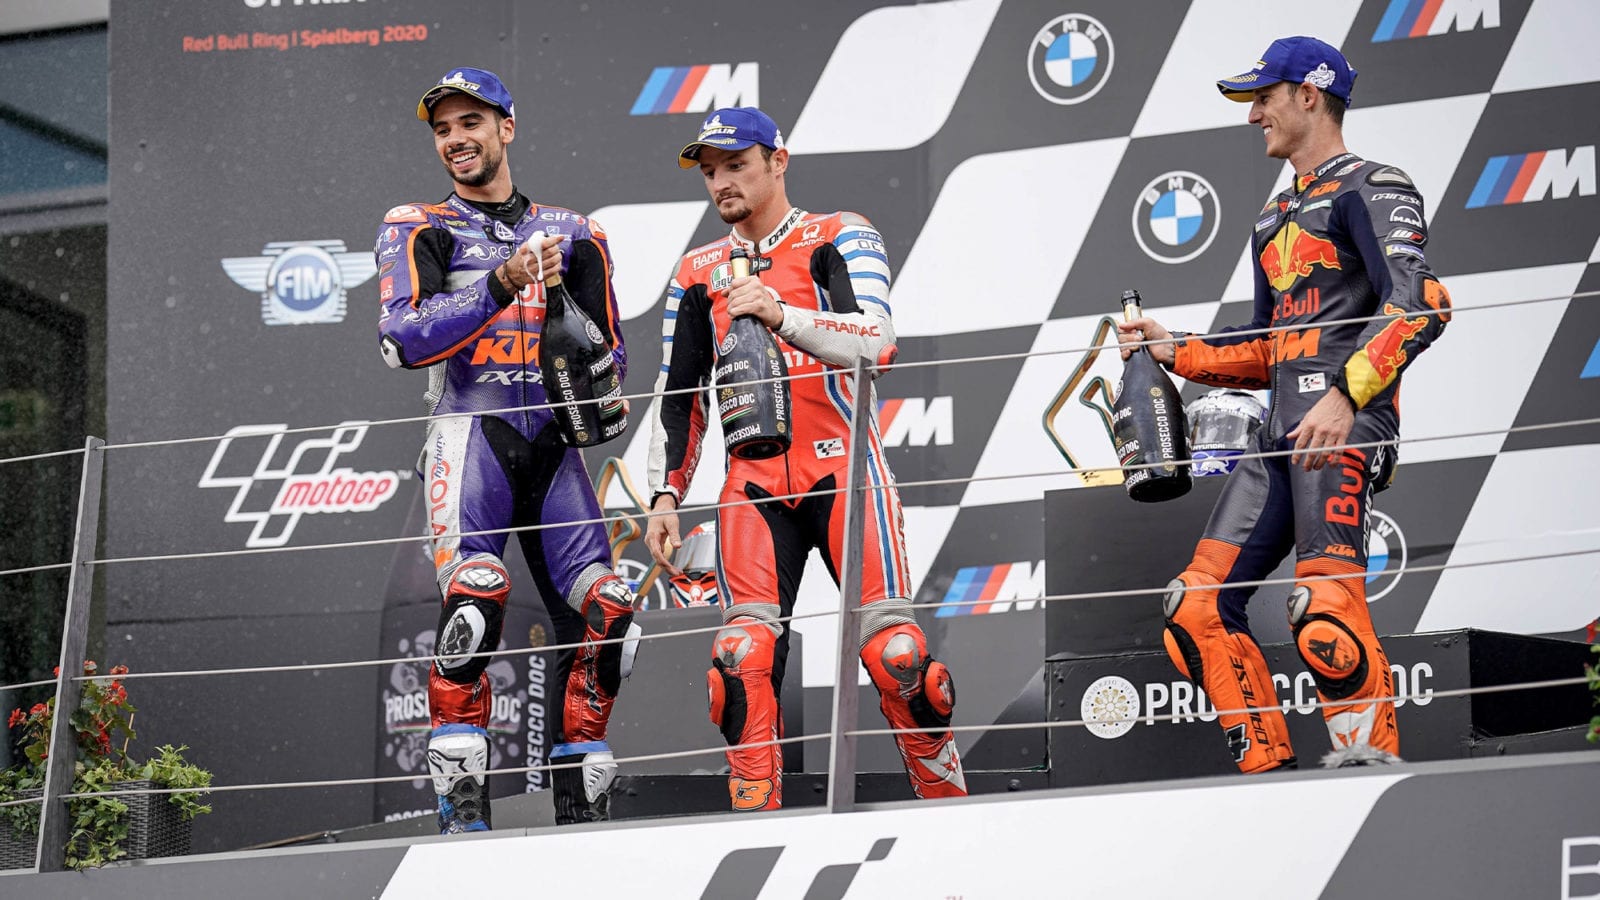 Miguel Oliveira Jack Miller and Pol Espargaro on the MotoGP podium at the Red Bull ring ater the 900th premier class motorcycle grand prix